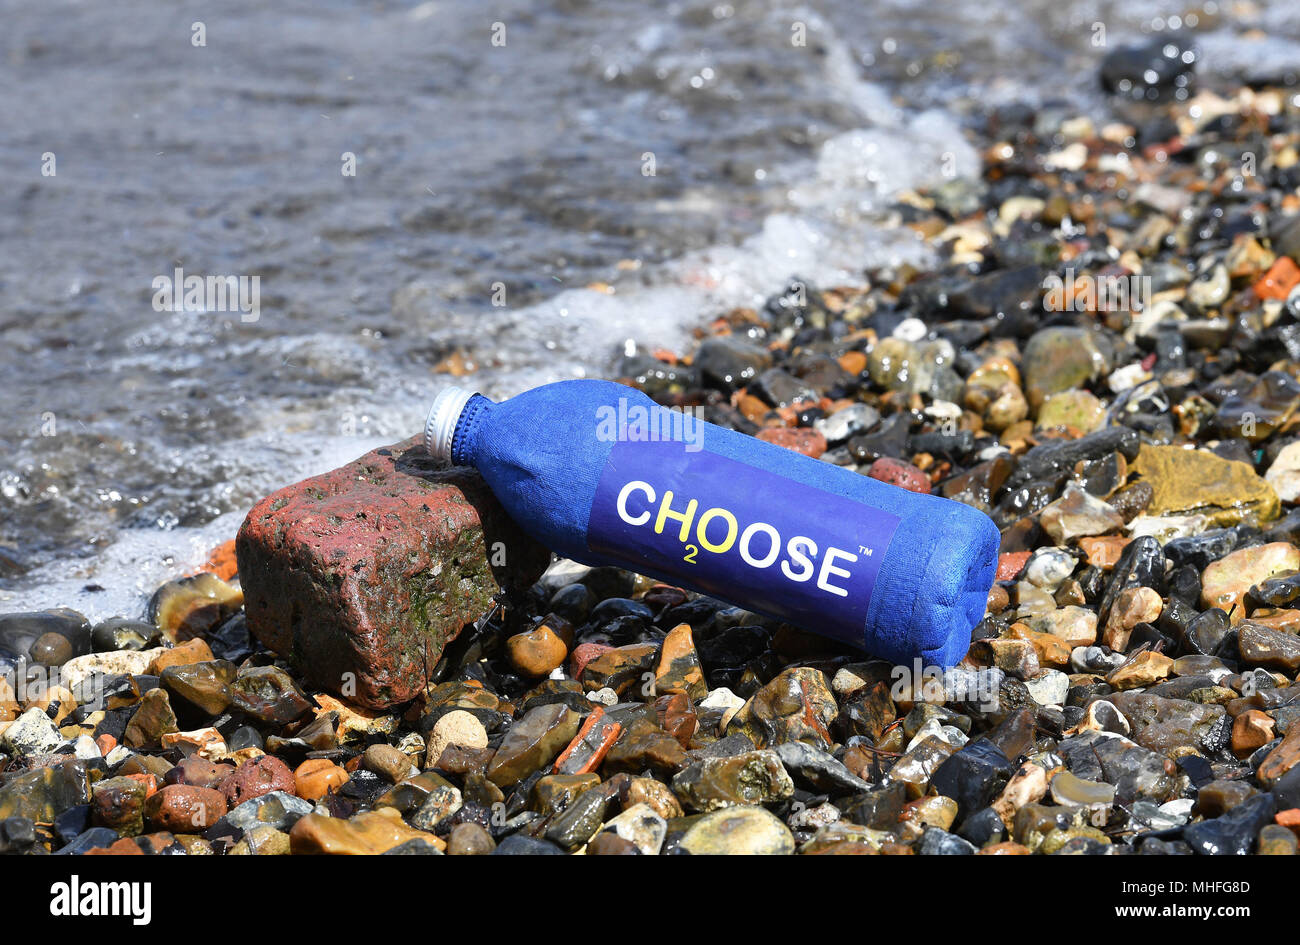 One of the bottle invented by James Longcroft that when immersed in water dissolves away completely, and may help to stop the rise of plastic waste pollution of the seas of the world. Stock Photo